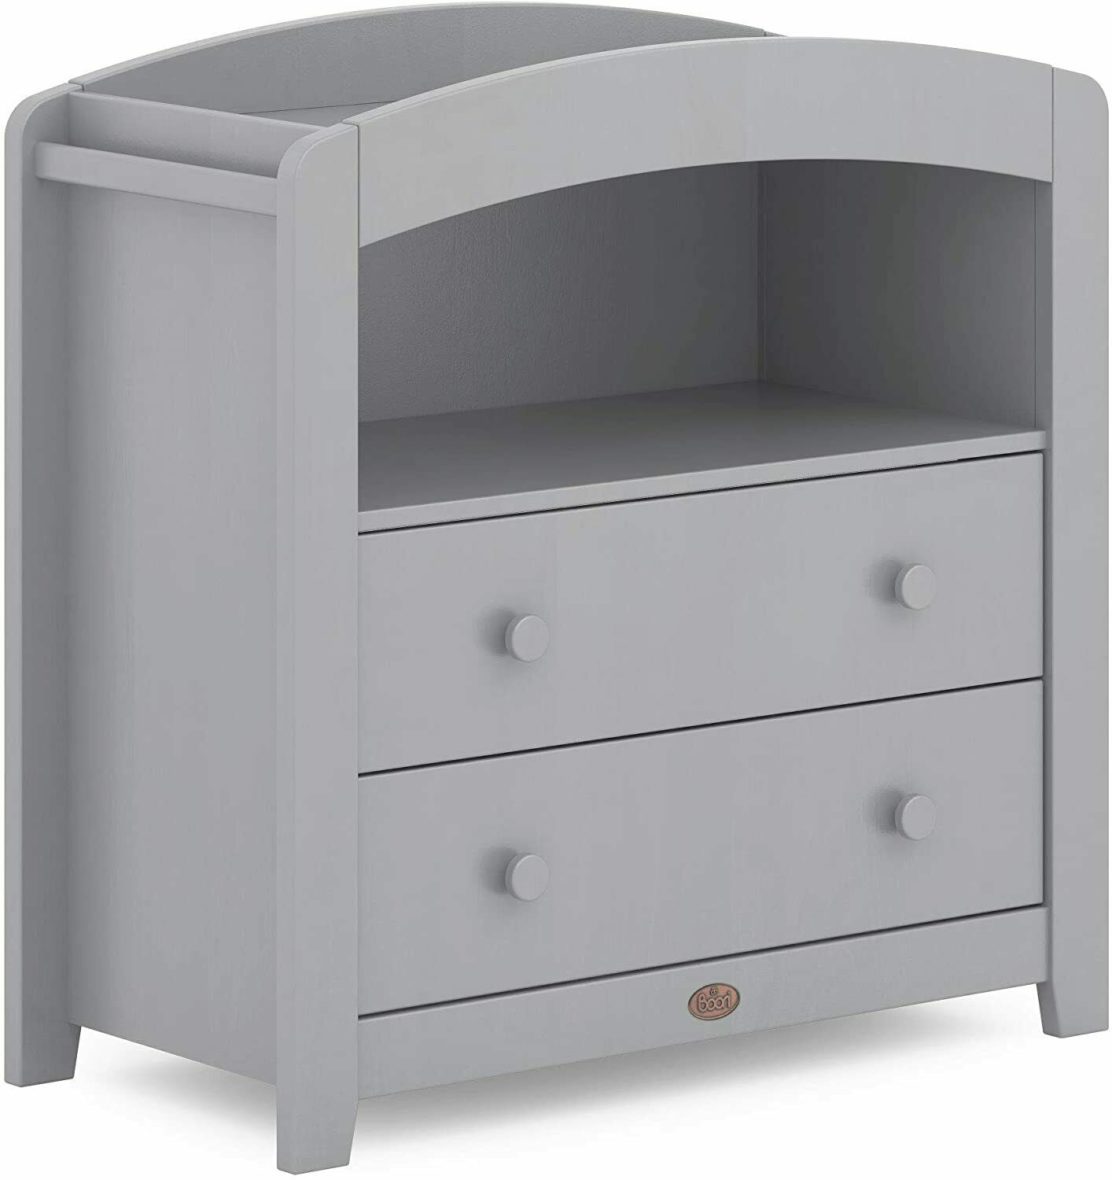 Ex-Display Boori Curved 2 Drawer Chest Changer- Pebble